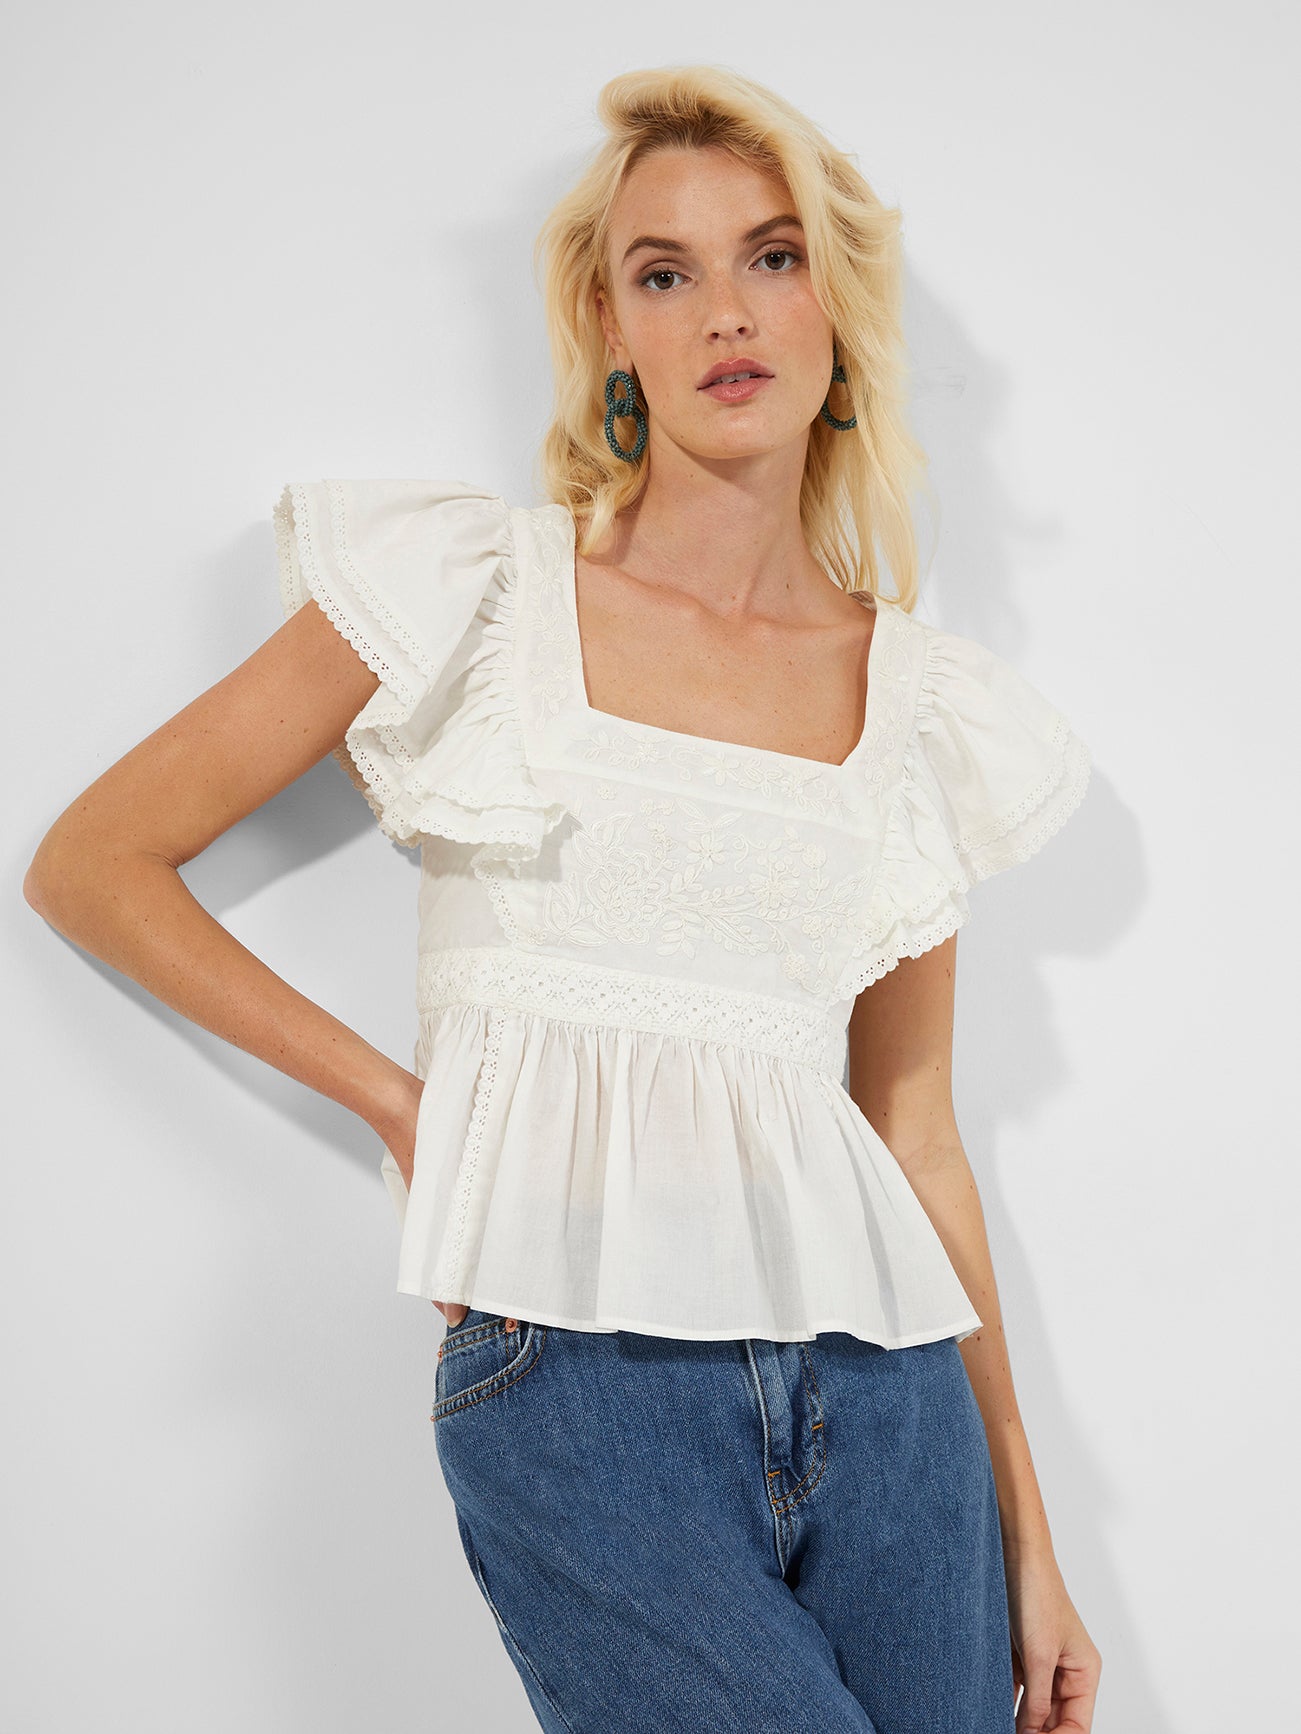 French Connection - Elana Embroidered Top | French Connection |  Shirts & Tops | 10 - White - Size: 10